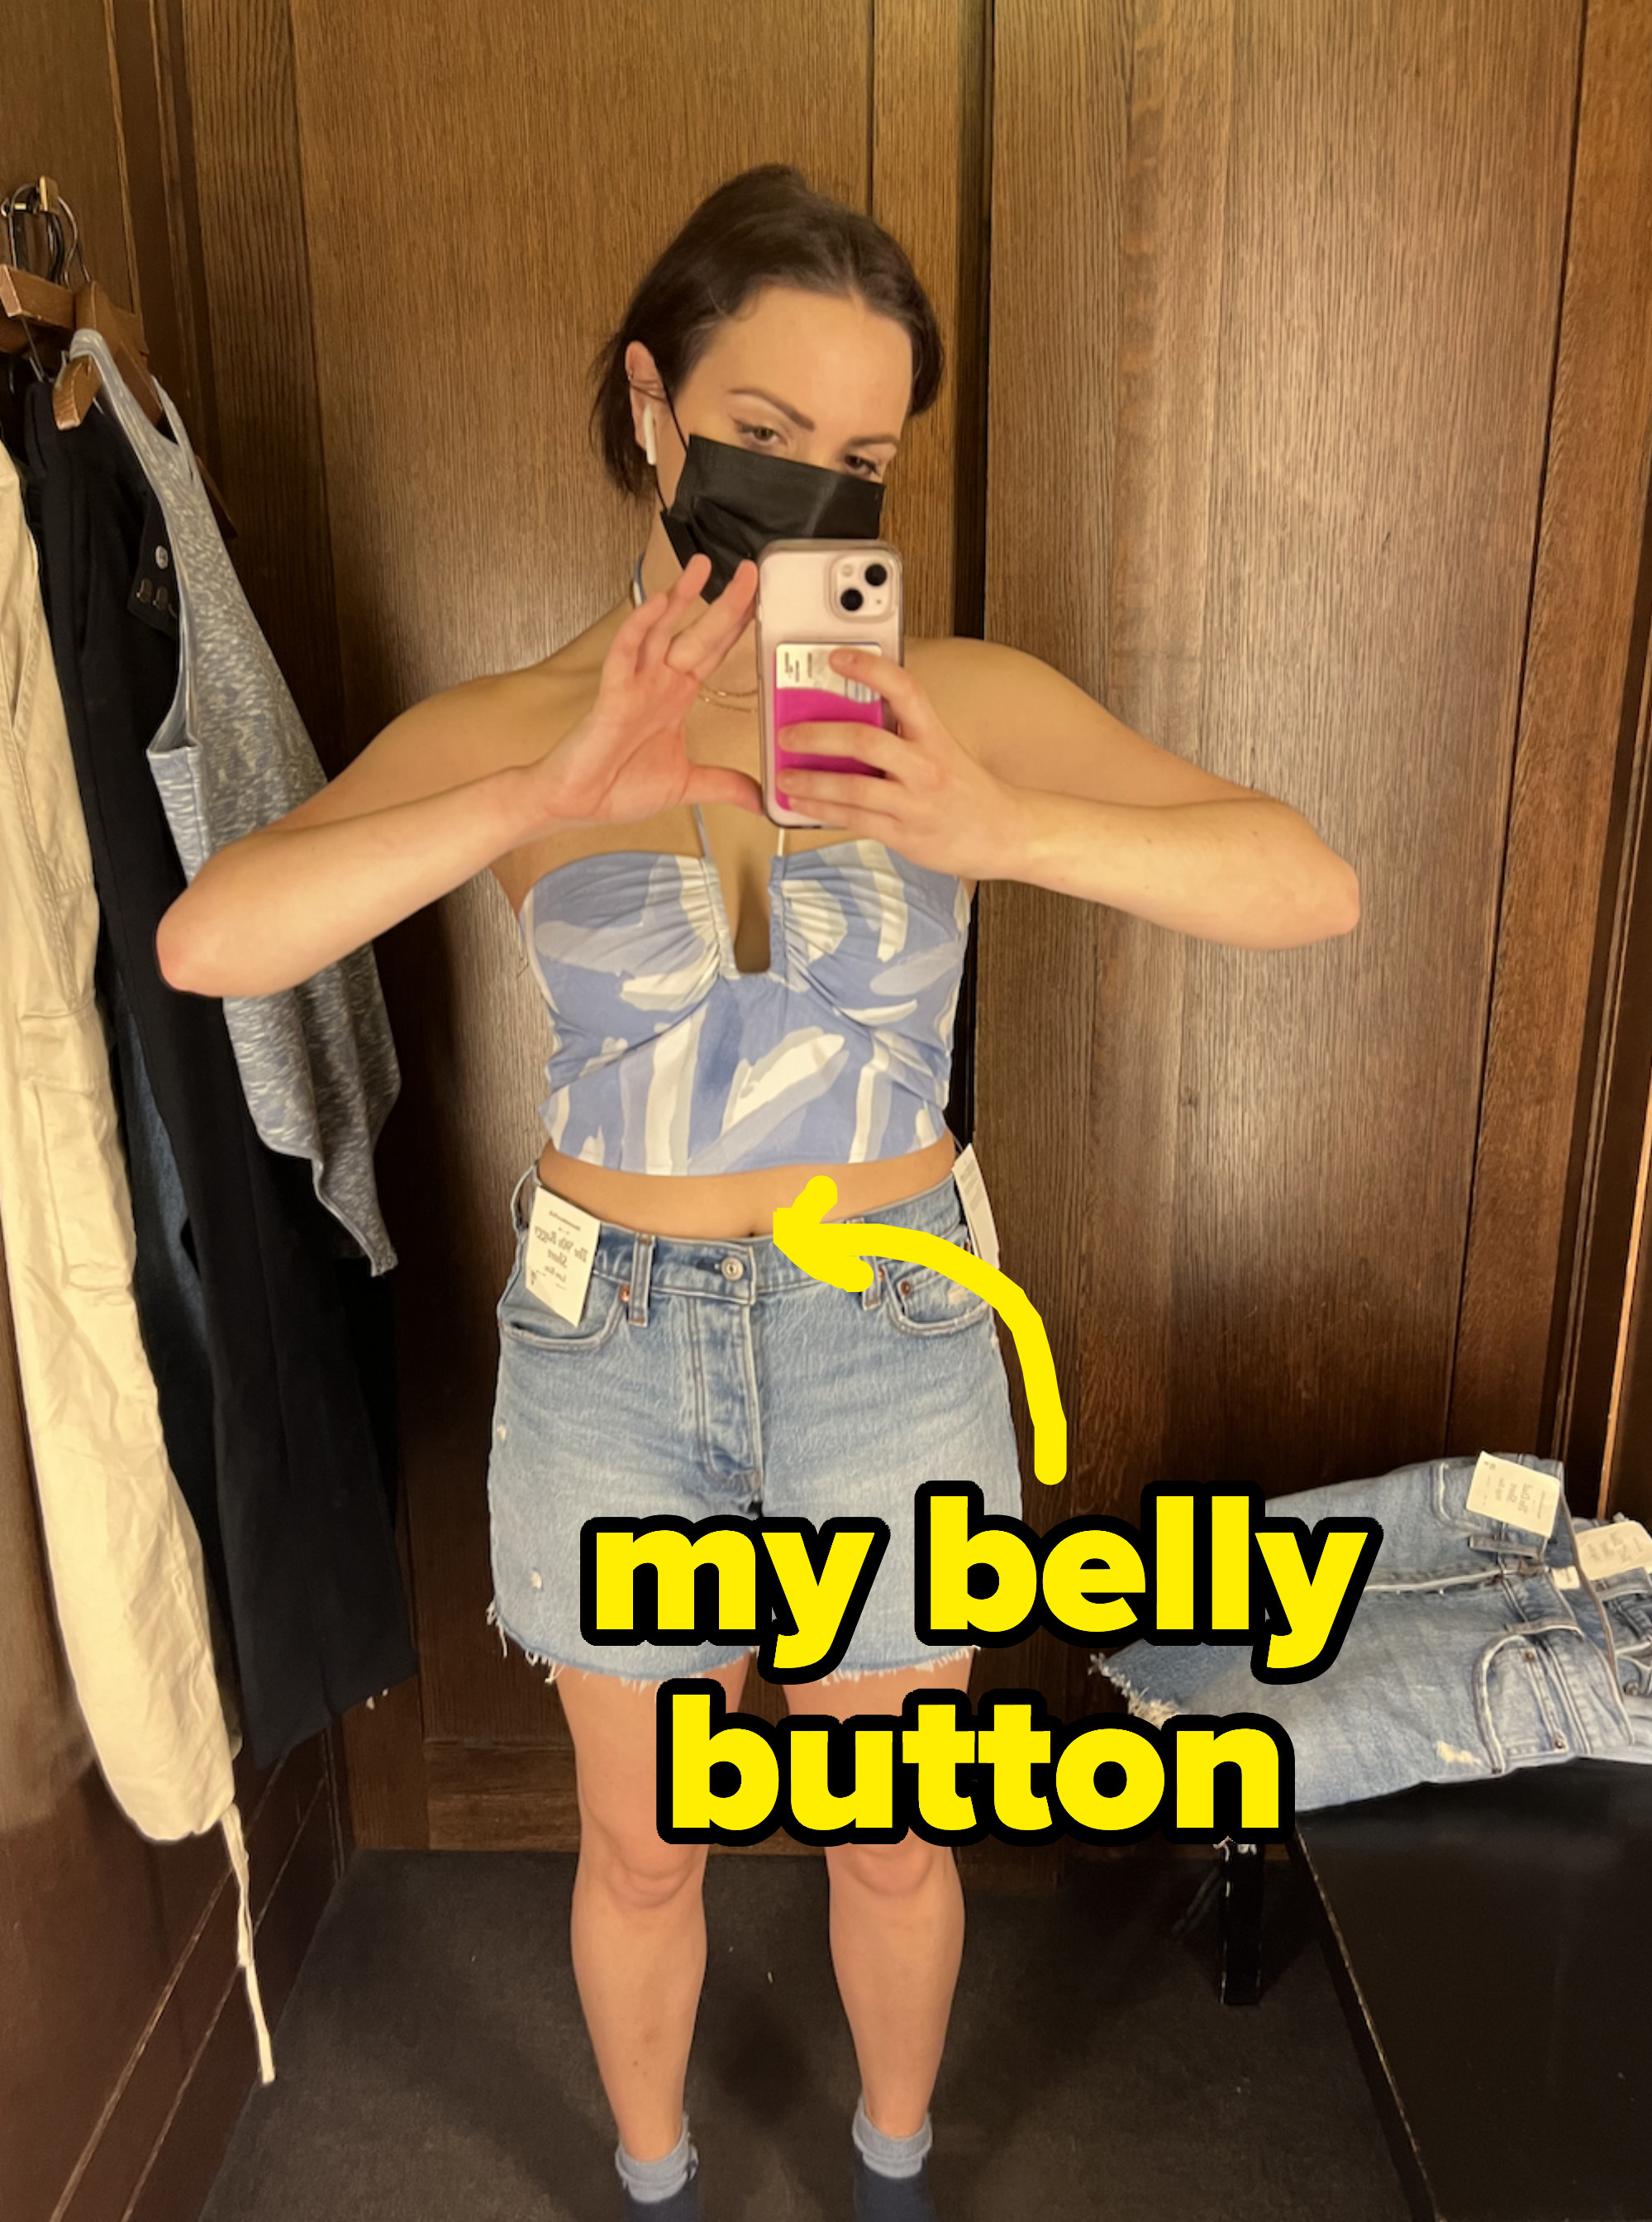 Hannah in a sleeveless top and jean short with arrow pointing to midriff, with text &quot;my belly button&quot;